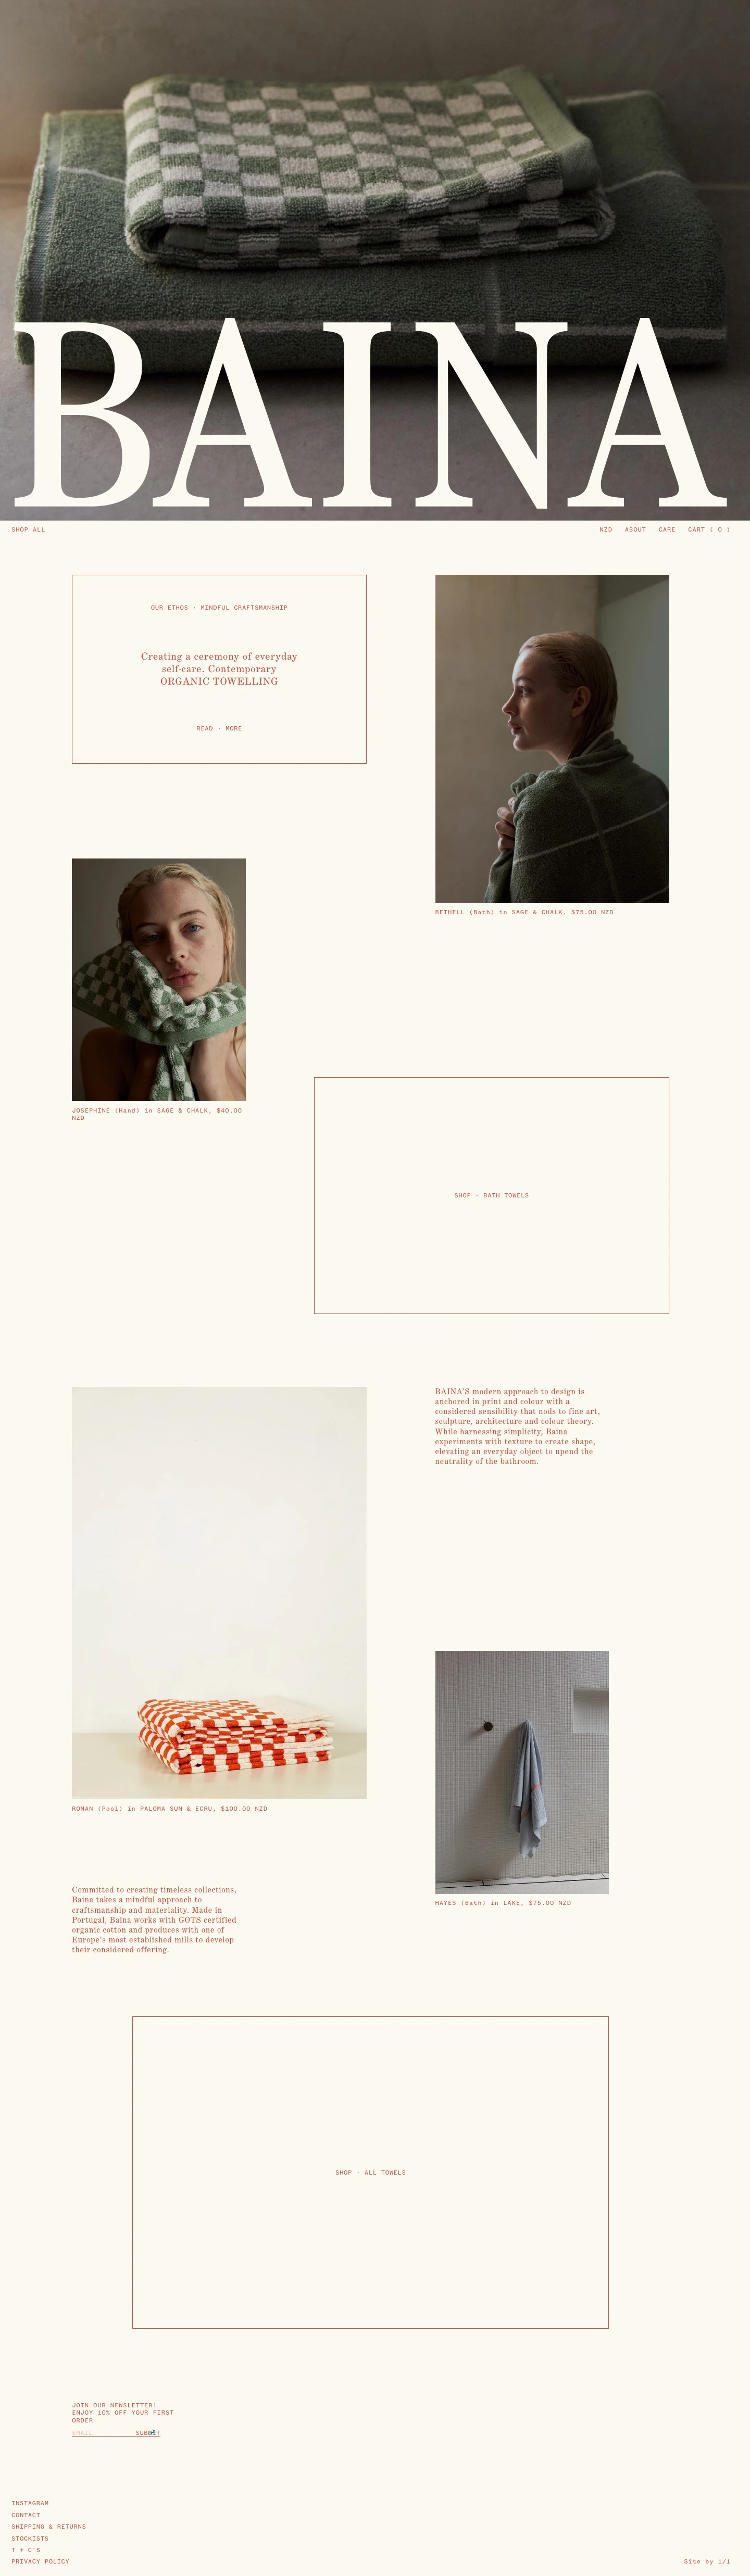 Baina Landing Page Example: Creating a ceremony of everyday self-care. Contemporary organic towelling designed in Melbourne, made in Portugal.